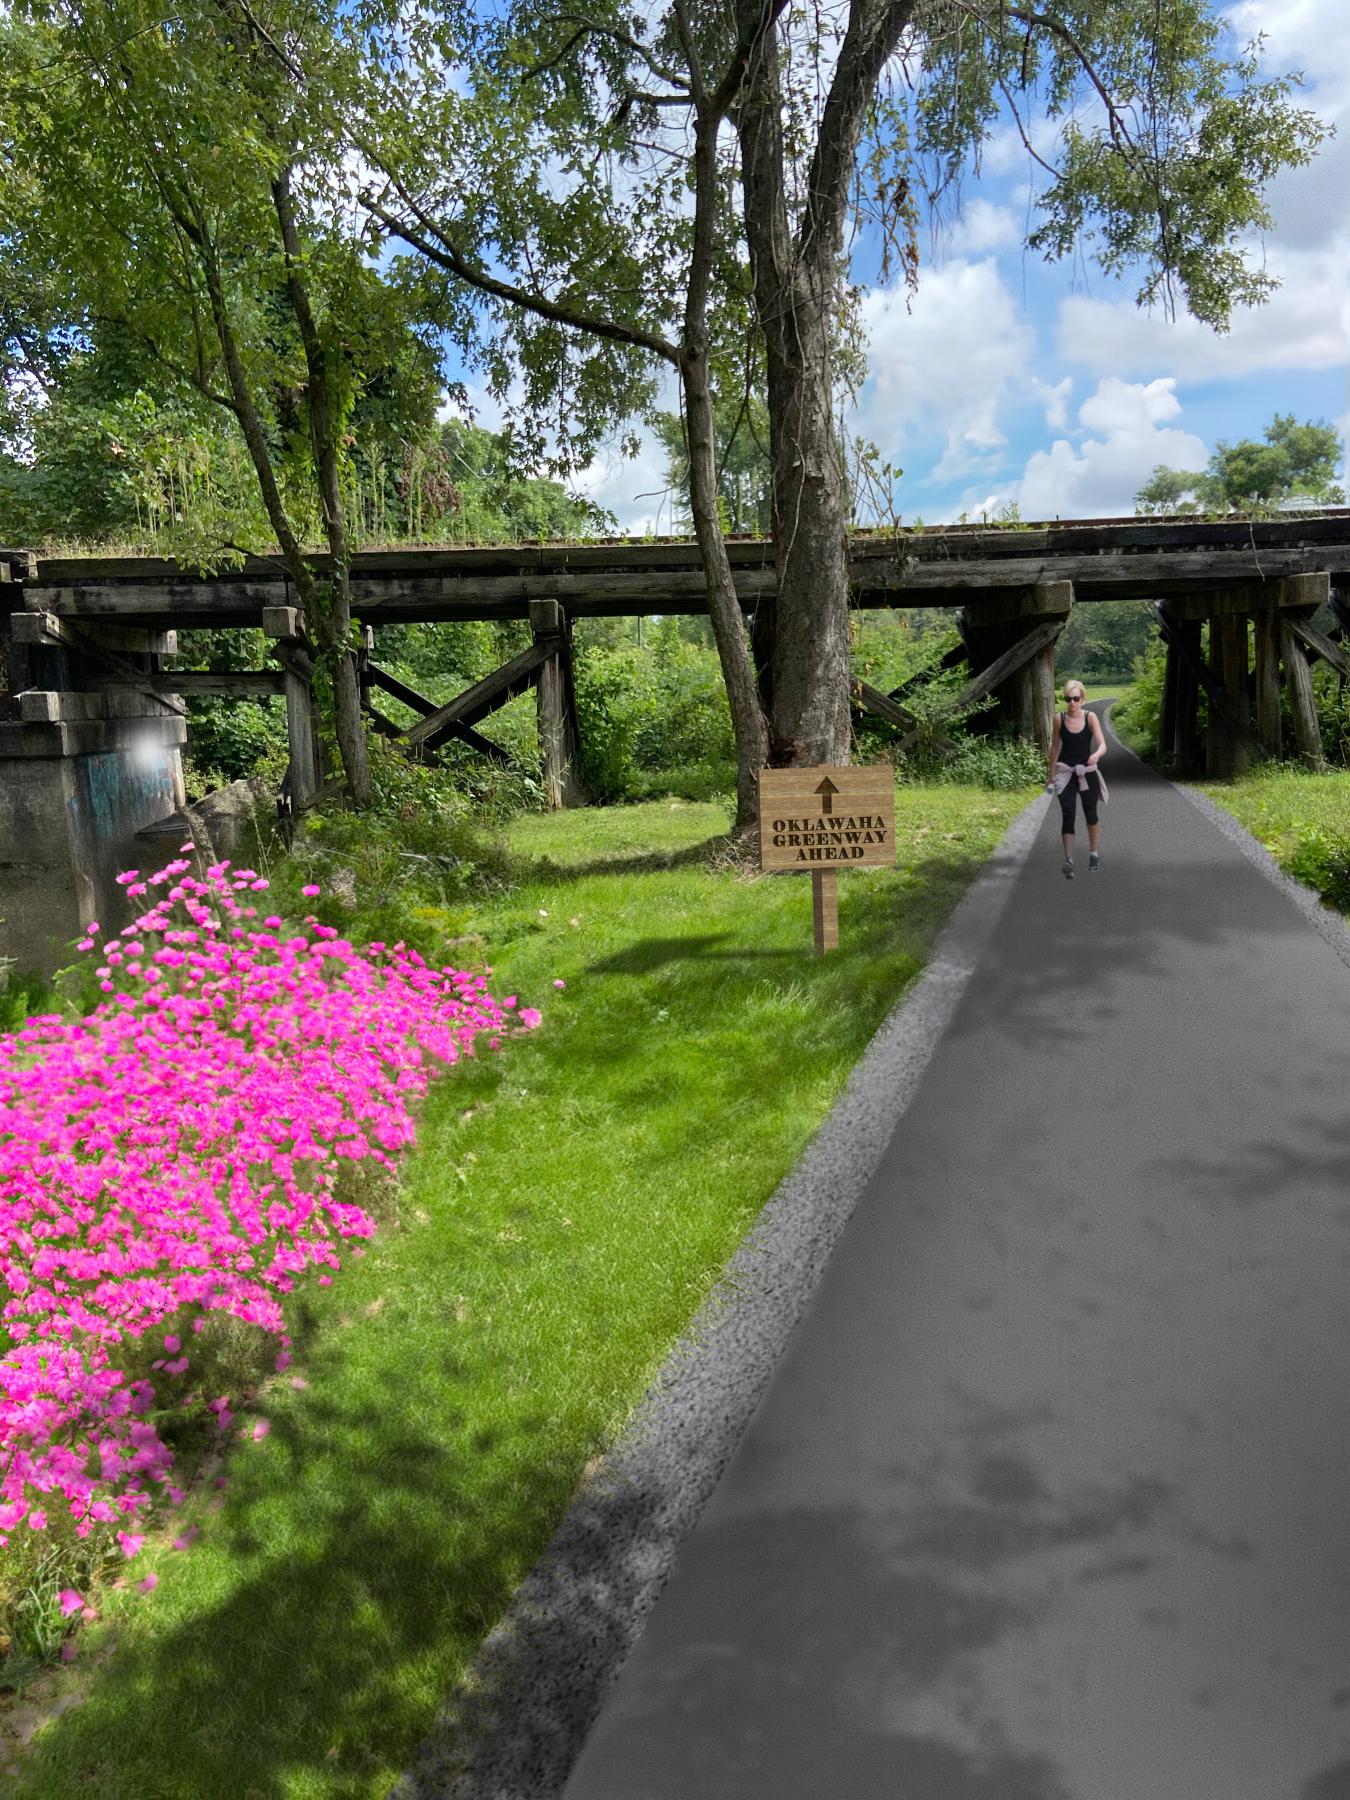 artist rendering of a greenway path going under a railroad bridge